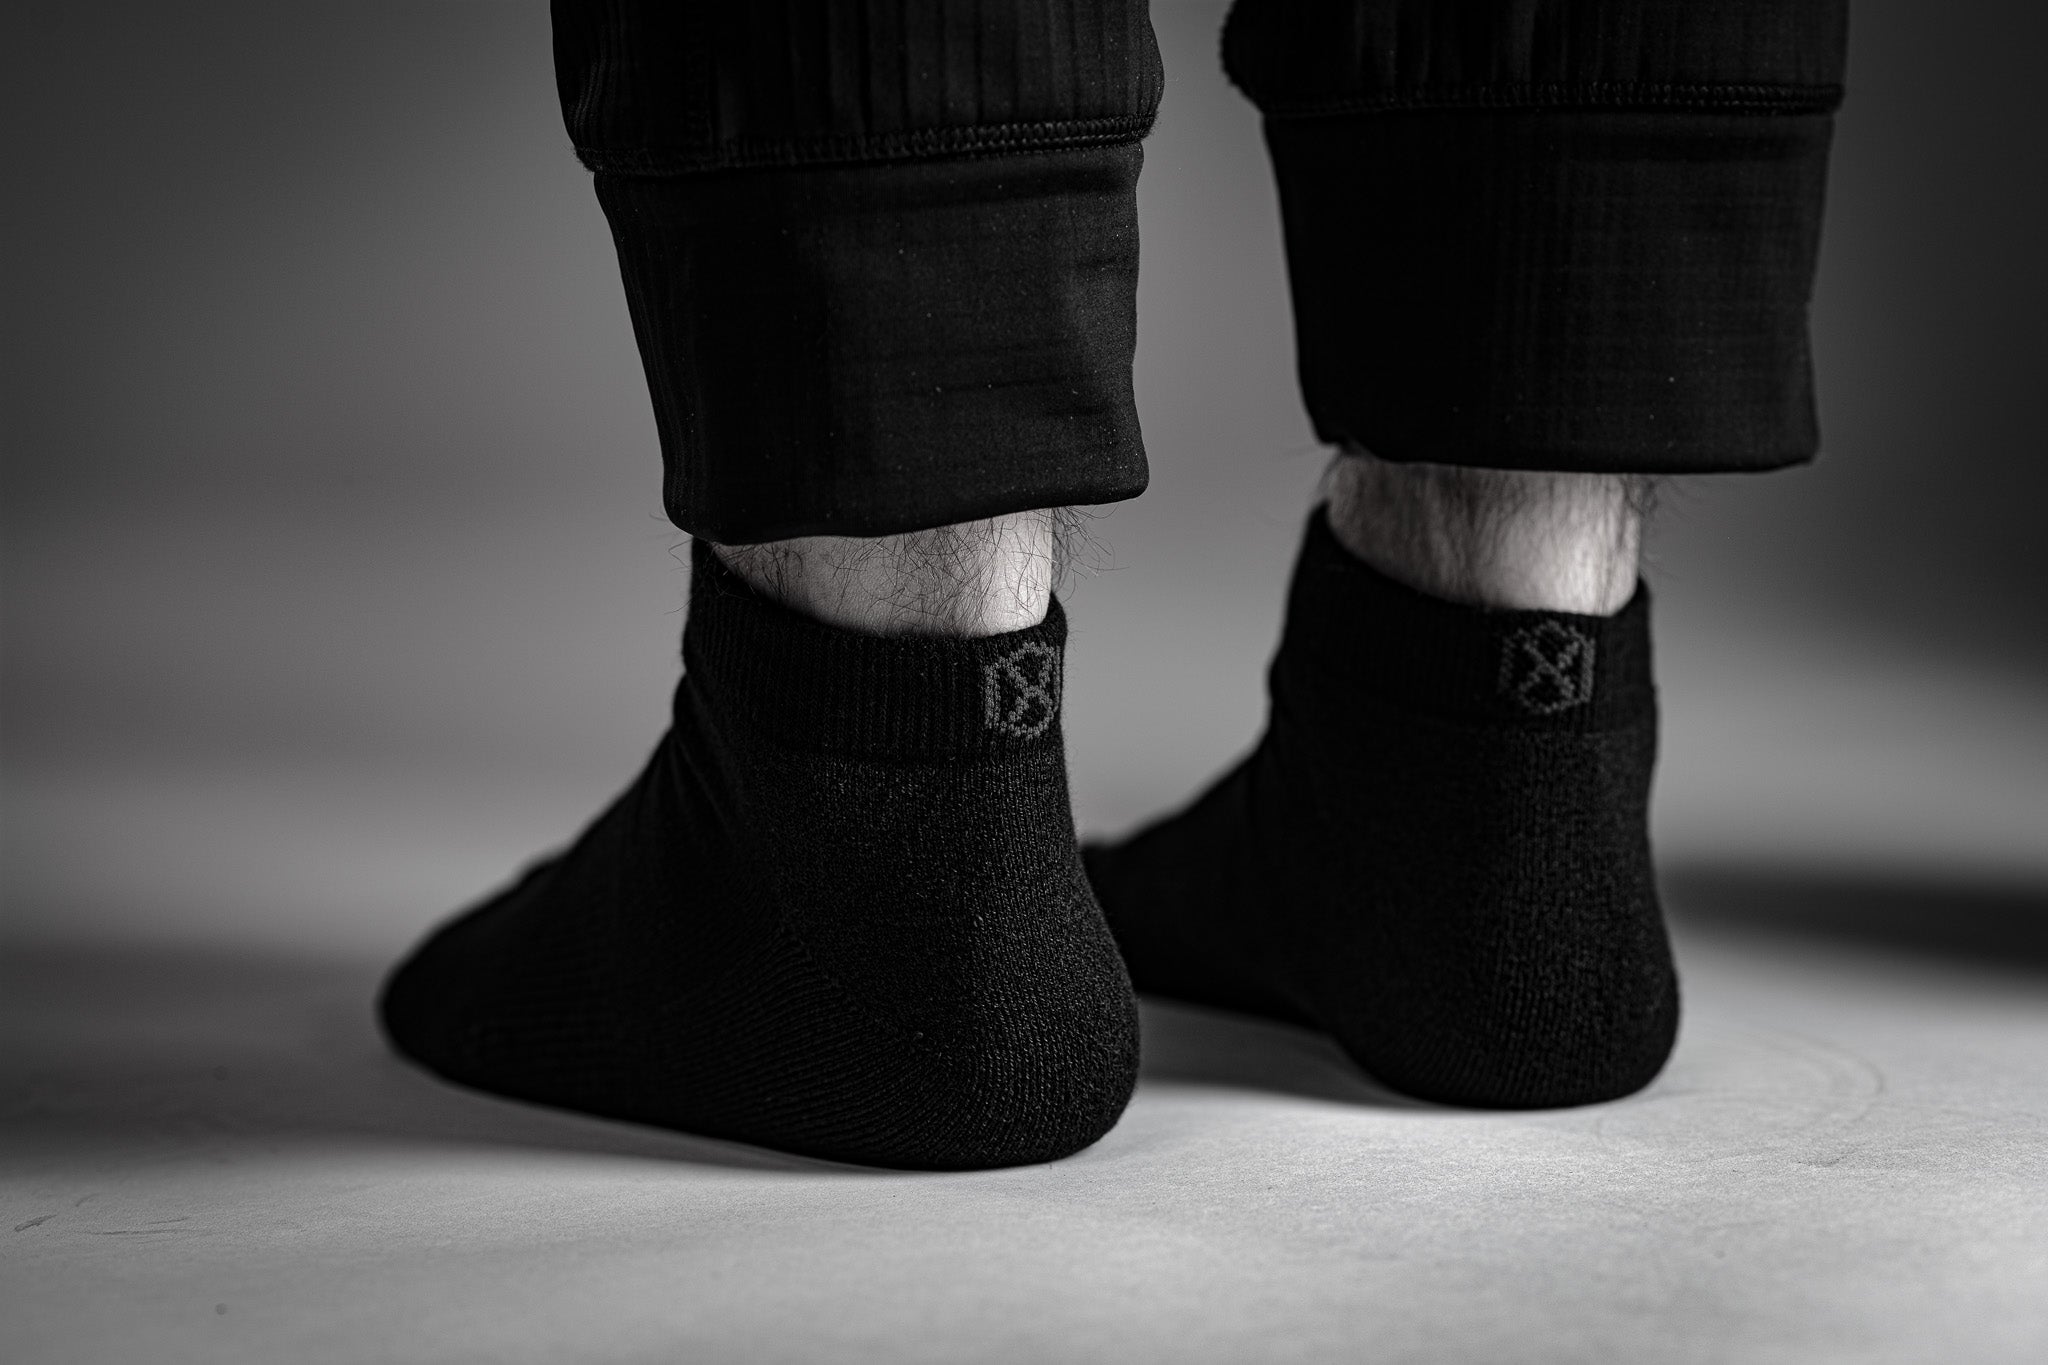 Which are the most durable and versatile socks? - Graphene X